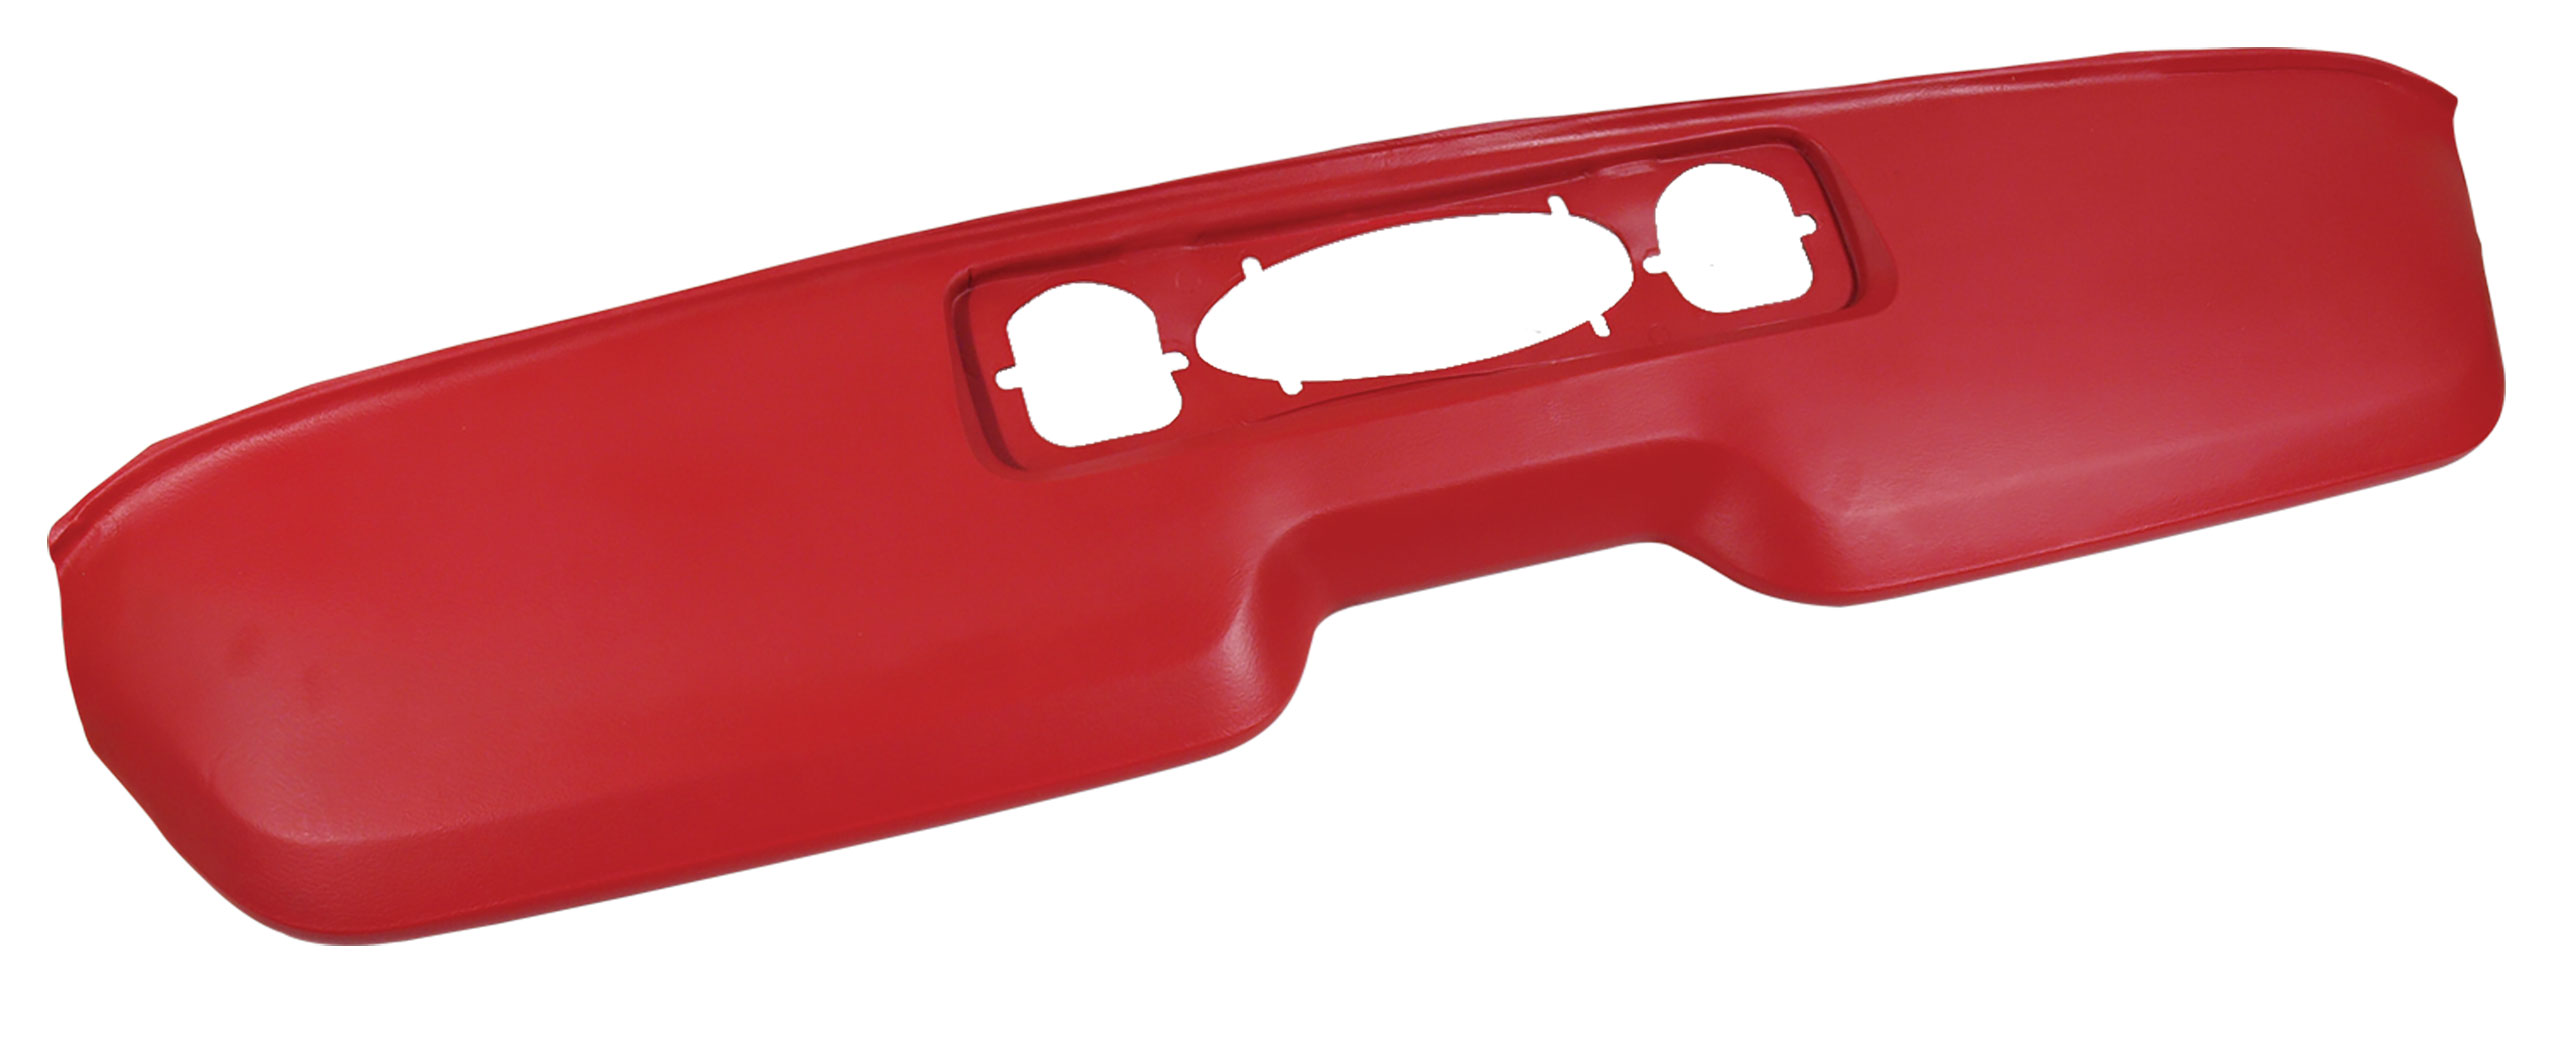 CA 1964-1965 Ford Mustang Dash Pad - Red - Urethane